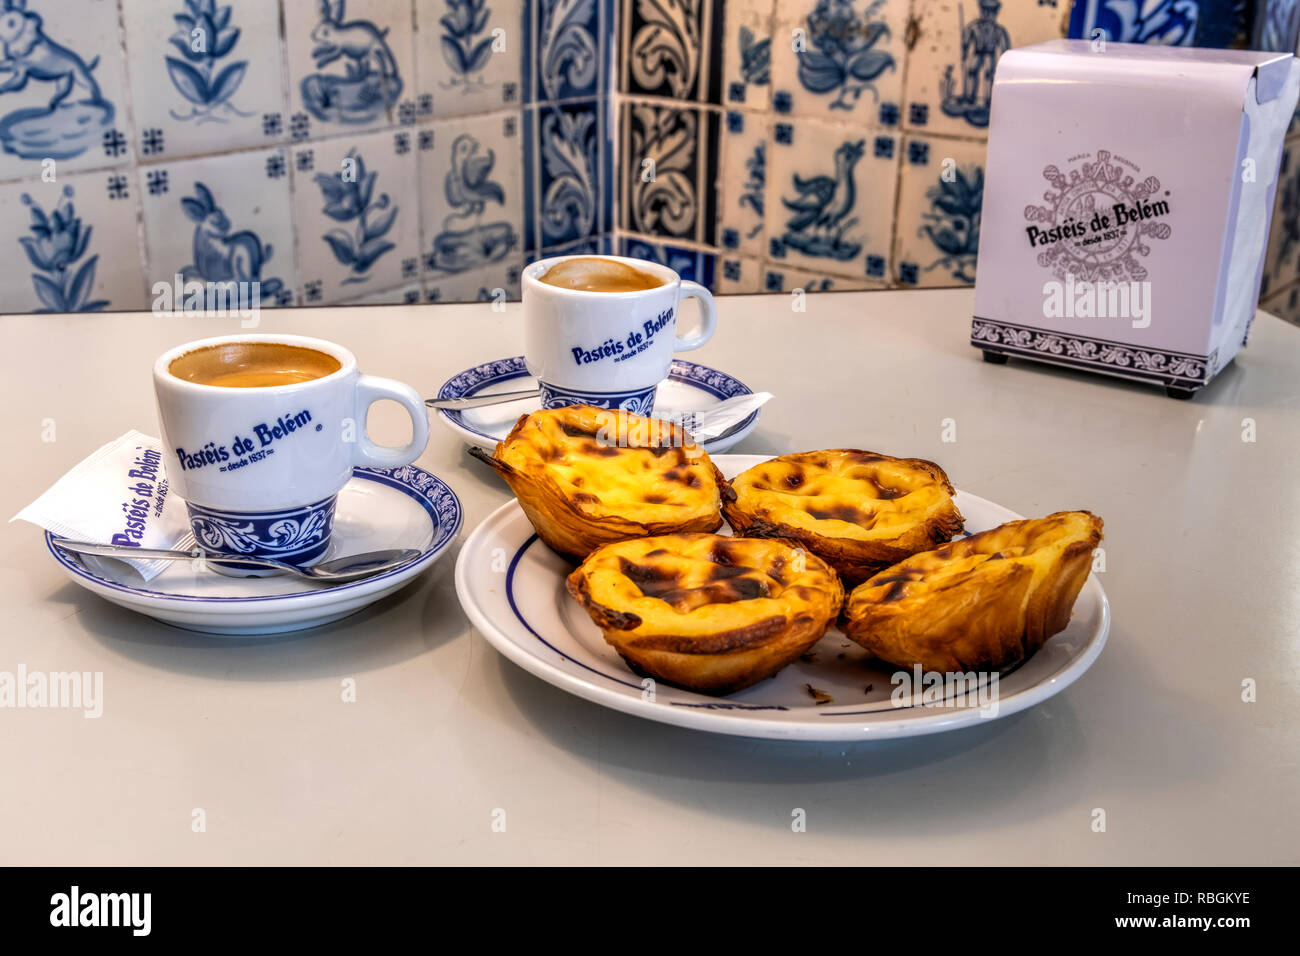 Pastel de belem or pasteis de nata custard tarts served with a cup of coffee at the historical Pasteis de Belem cafe in Belem, Lisbon, Portugal Stock Photo